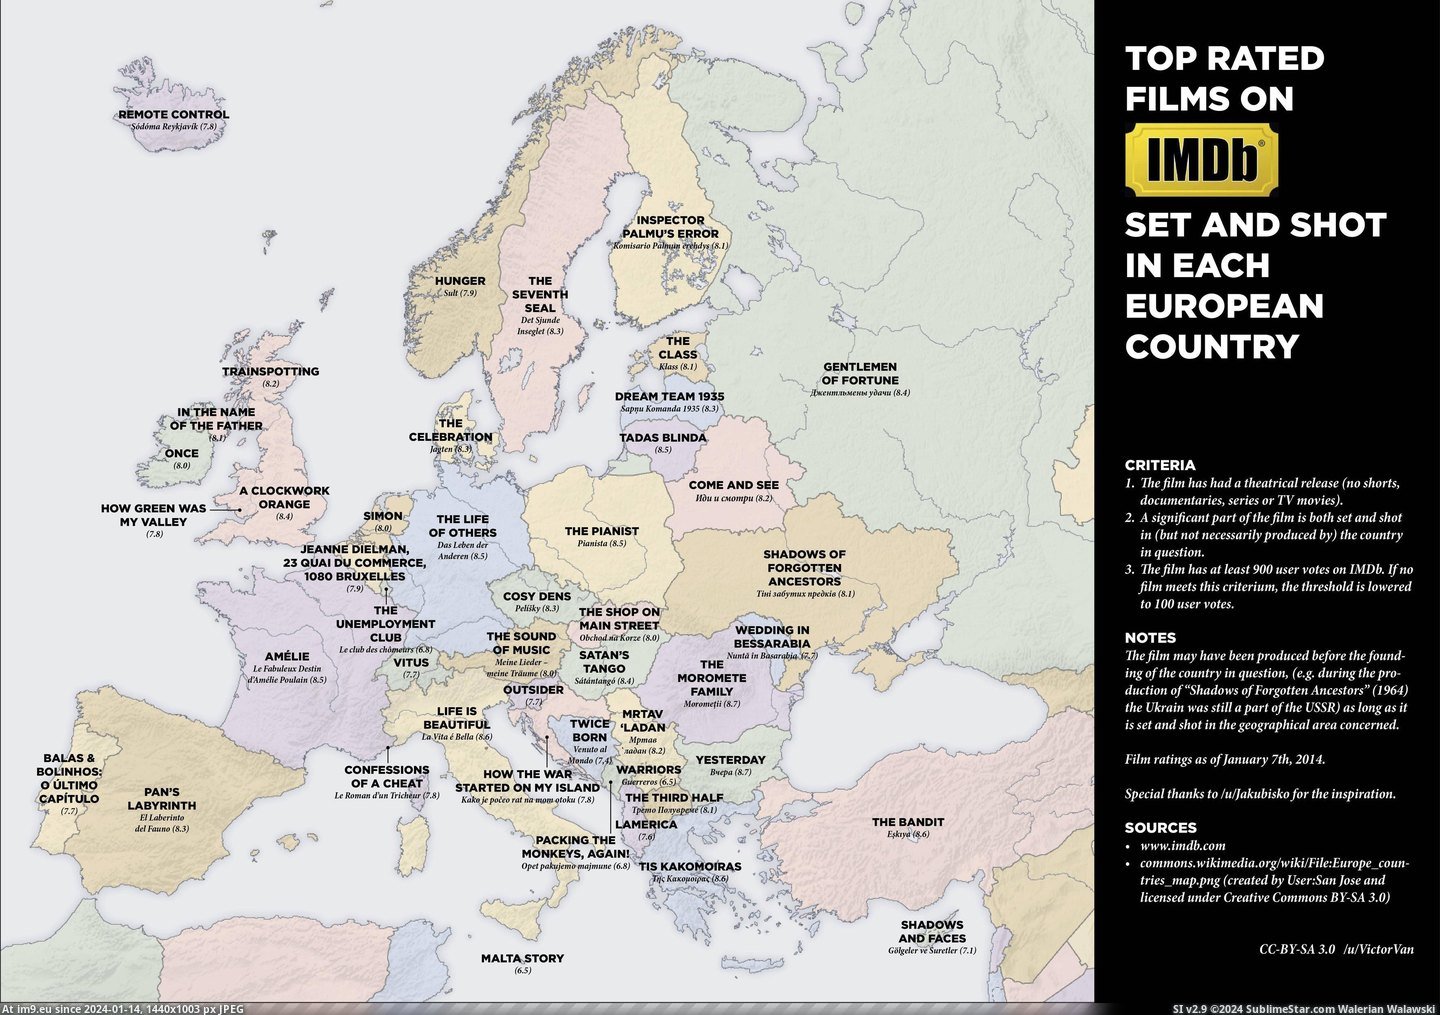 #Shot #Top #Films #Rated #Imdb #European #Country [Mapporn] Top rated films on IMDb set and shot in each European country [7087x4961] [OC] Pic. (Image of album My r/MAPS favs))